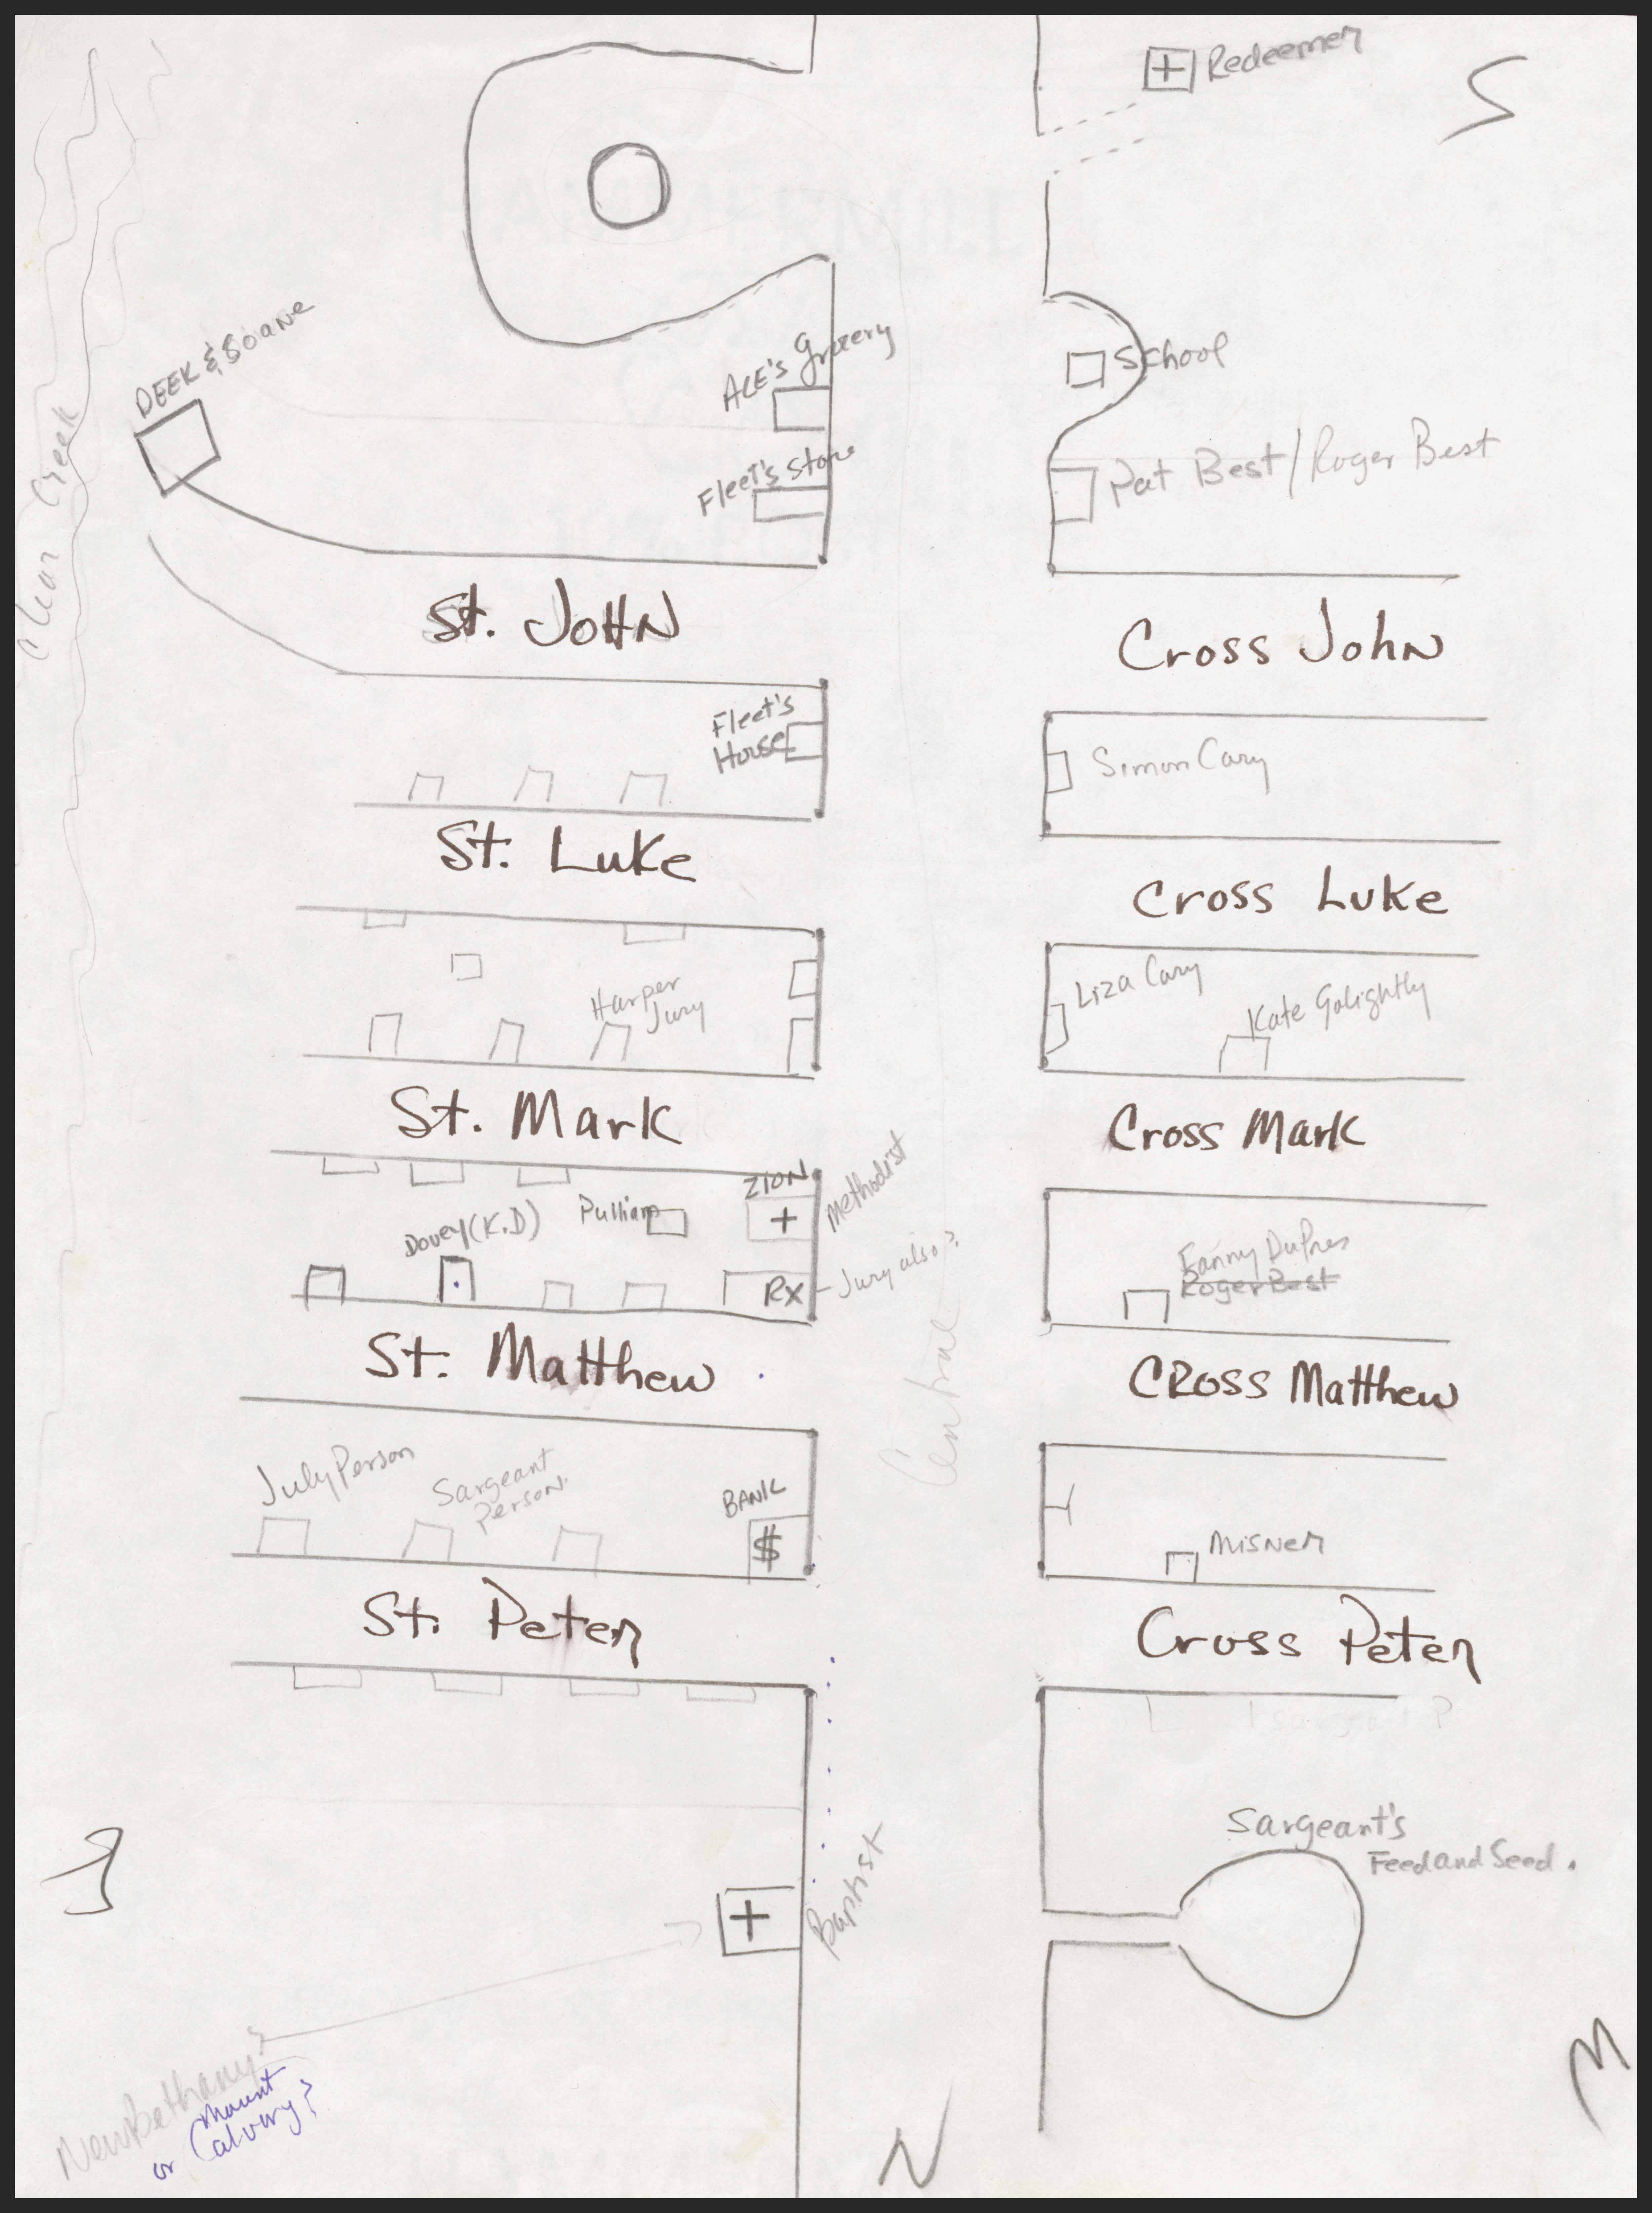 Hand-drawn map of "Ruby," the fictional town from the novel "Paradise," by Toni Morrison from her papers at PUL